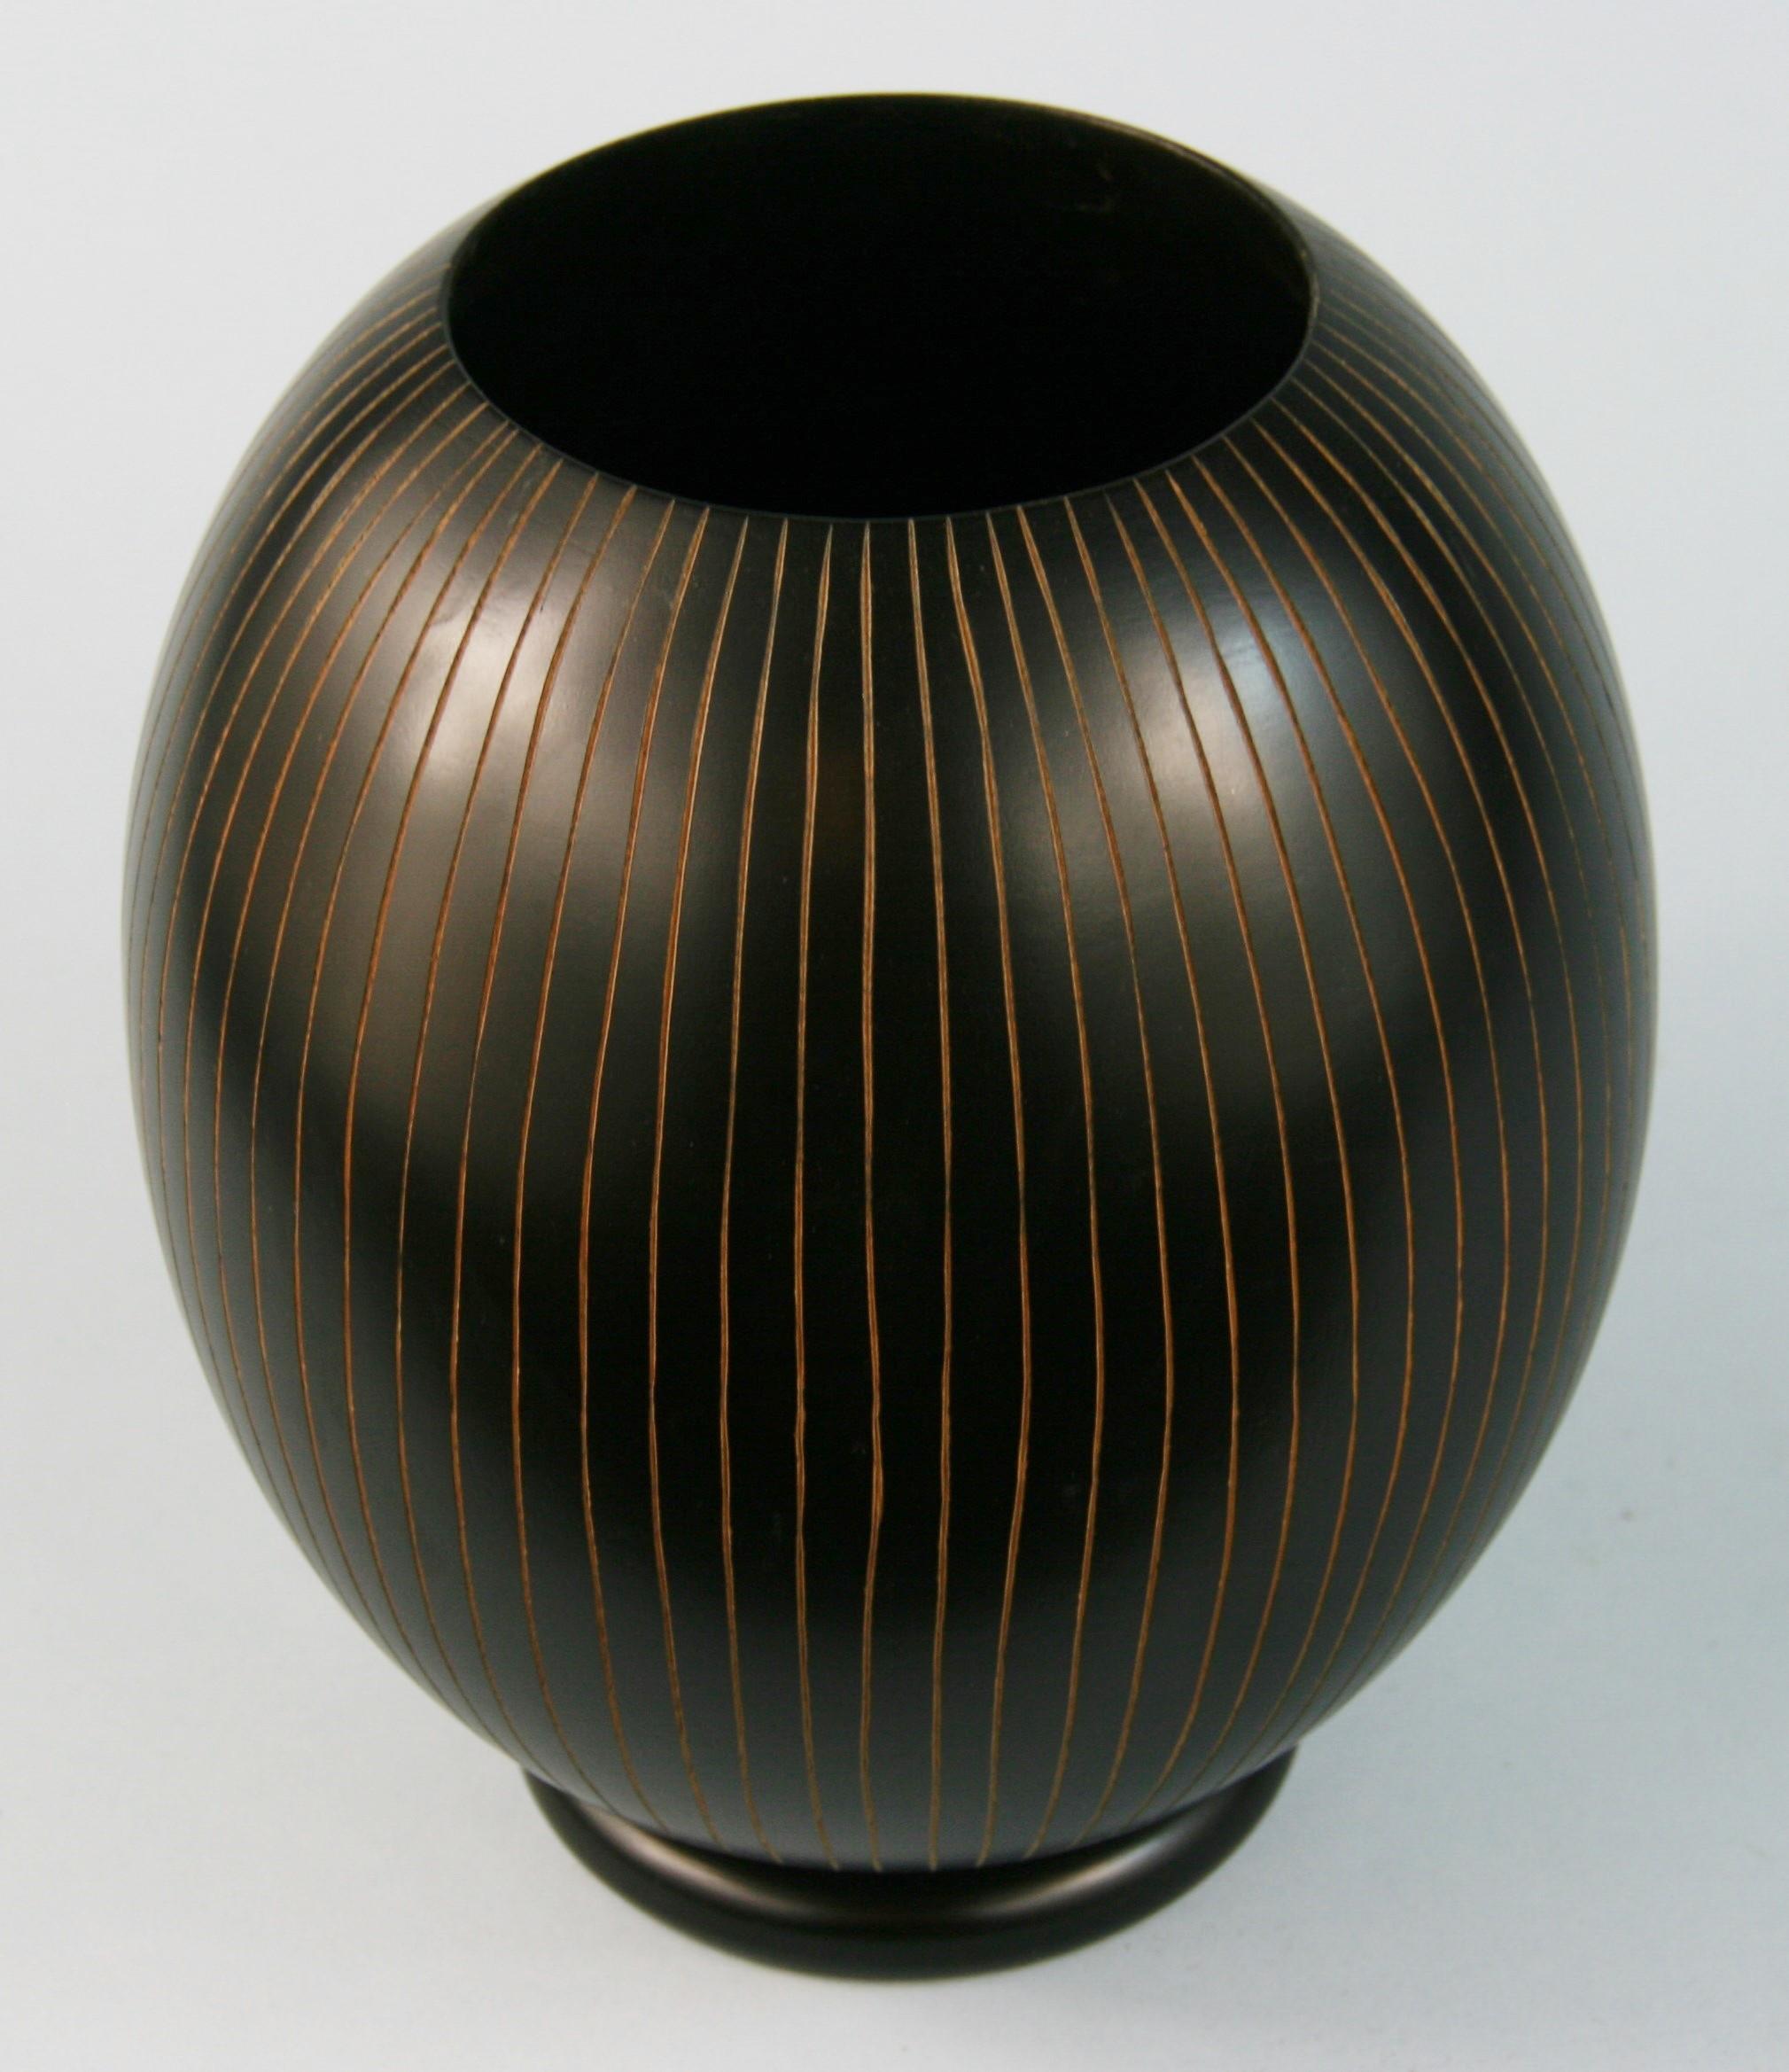 3-617 Japanese hand turned wood vase with concentric groves.